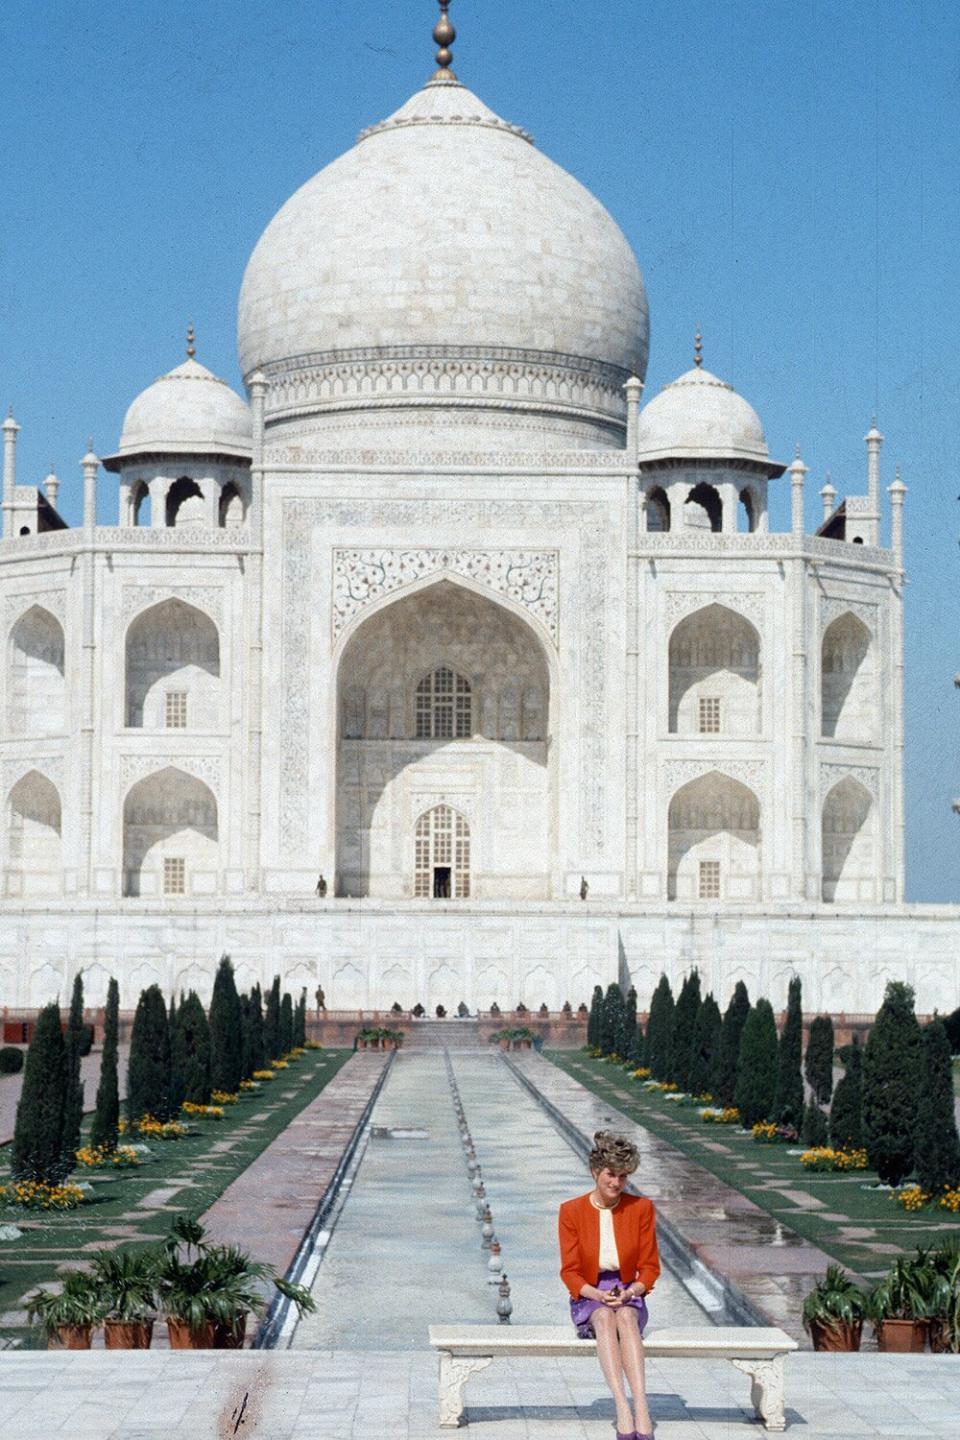 AGRA, INDIA - FEBRUARY 11: Daiana, Princess of Wales, wearing a red and purple suit designed by Catherine Walker, poses alone outside the Taj Mahal on February 11, 1992 in Agra, India. 12 years earlier her husband, Prince Charles, Prince of Wales, posed in the same spot. (Photo by Anwar Hussein/Getty Images)